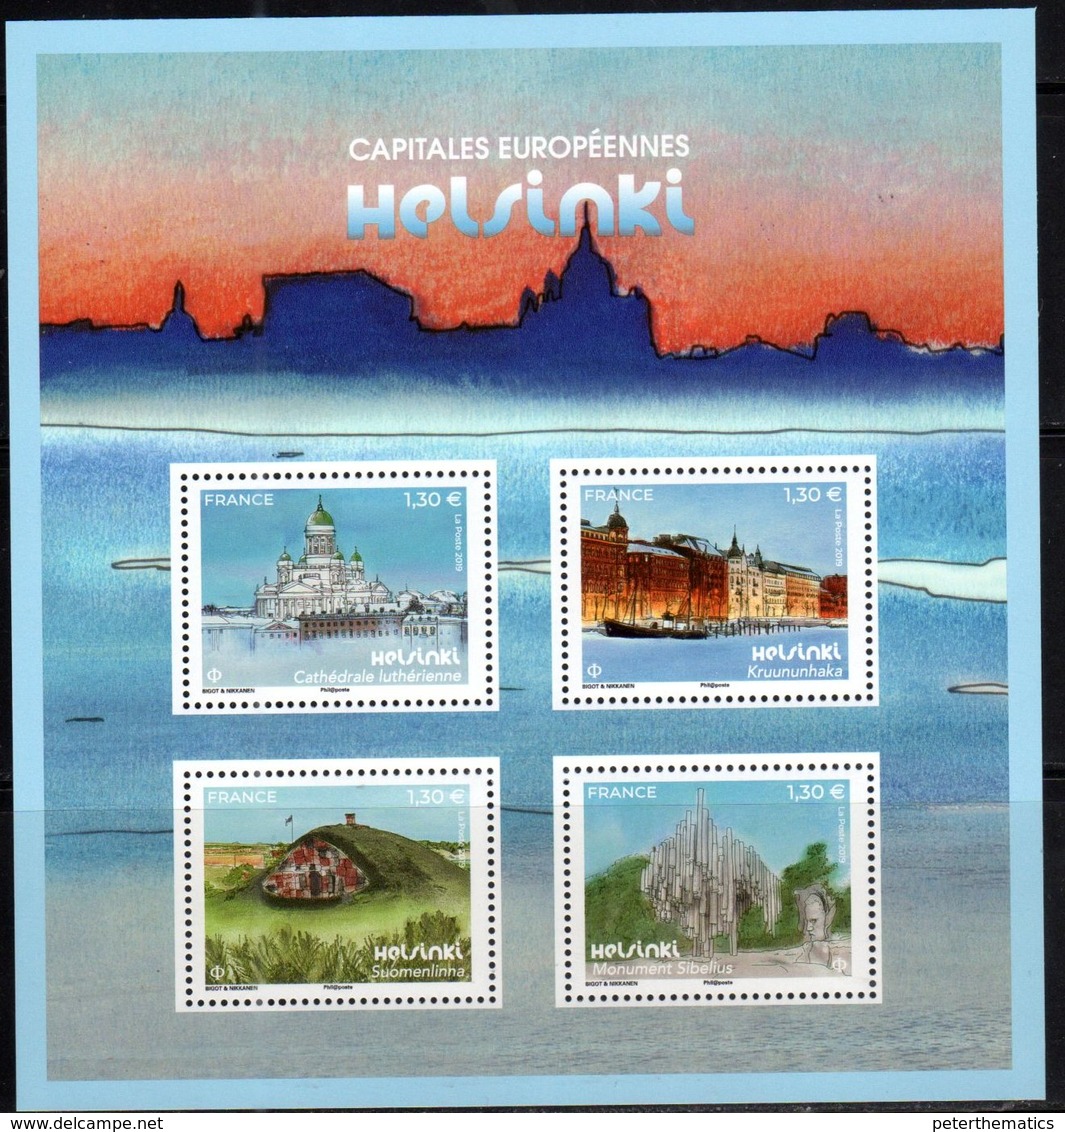 FRANCE, 2019, MNH, EUROPEAN CAPITALS, HELSINKI, HARBOURS, SHIPS, CATHEDRALS, SHEETLET - Geography